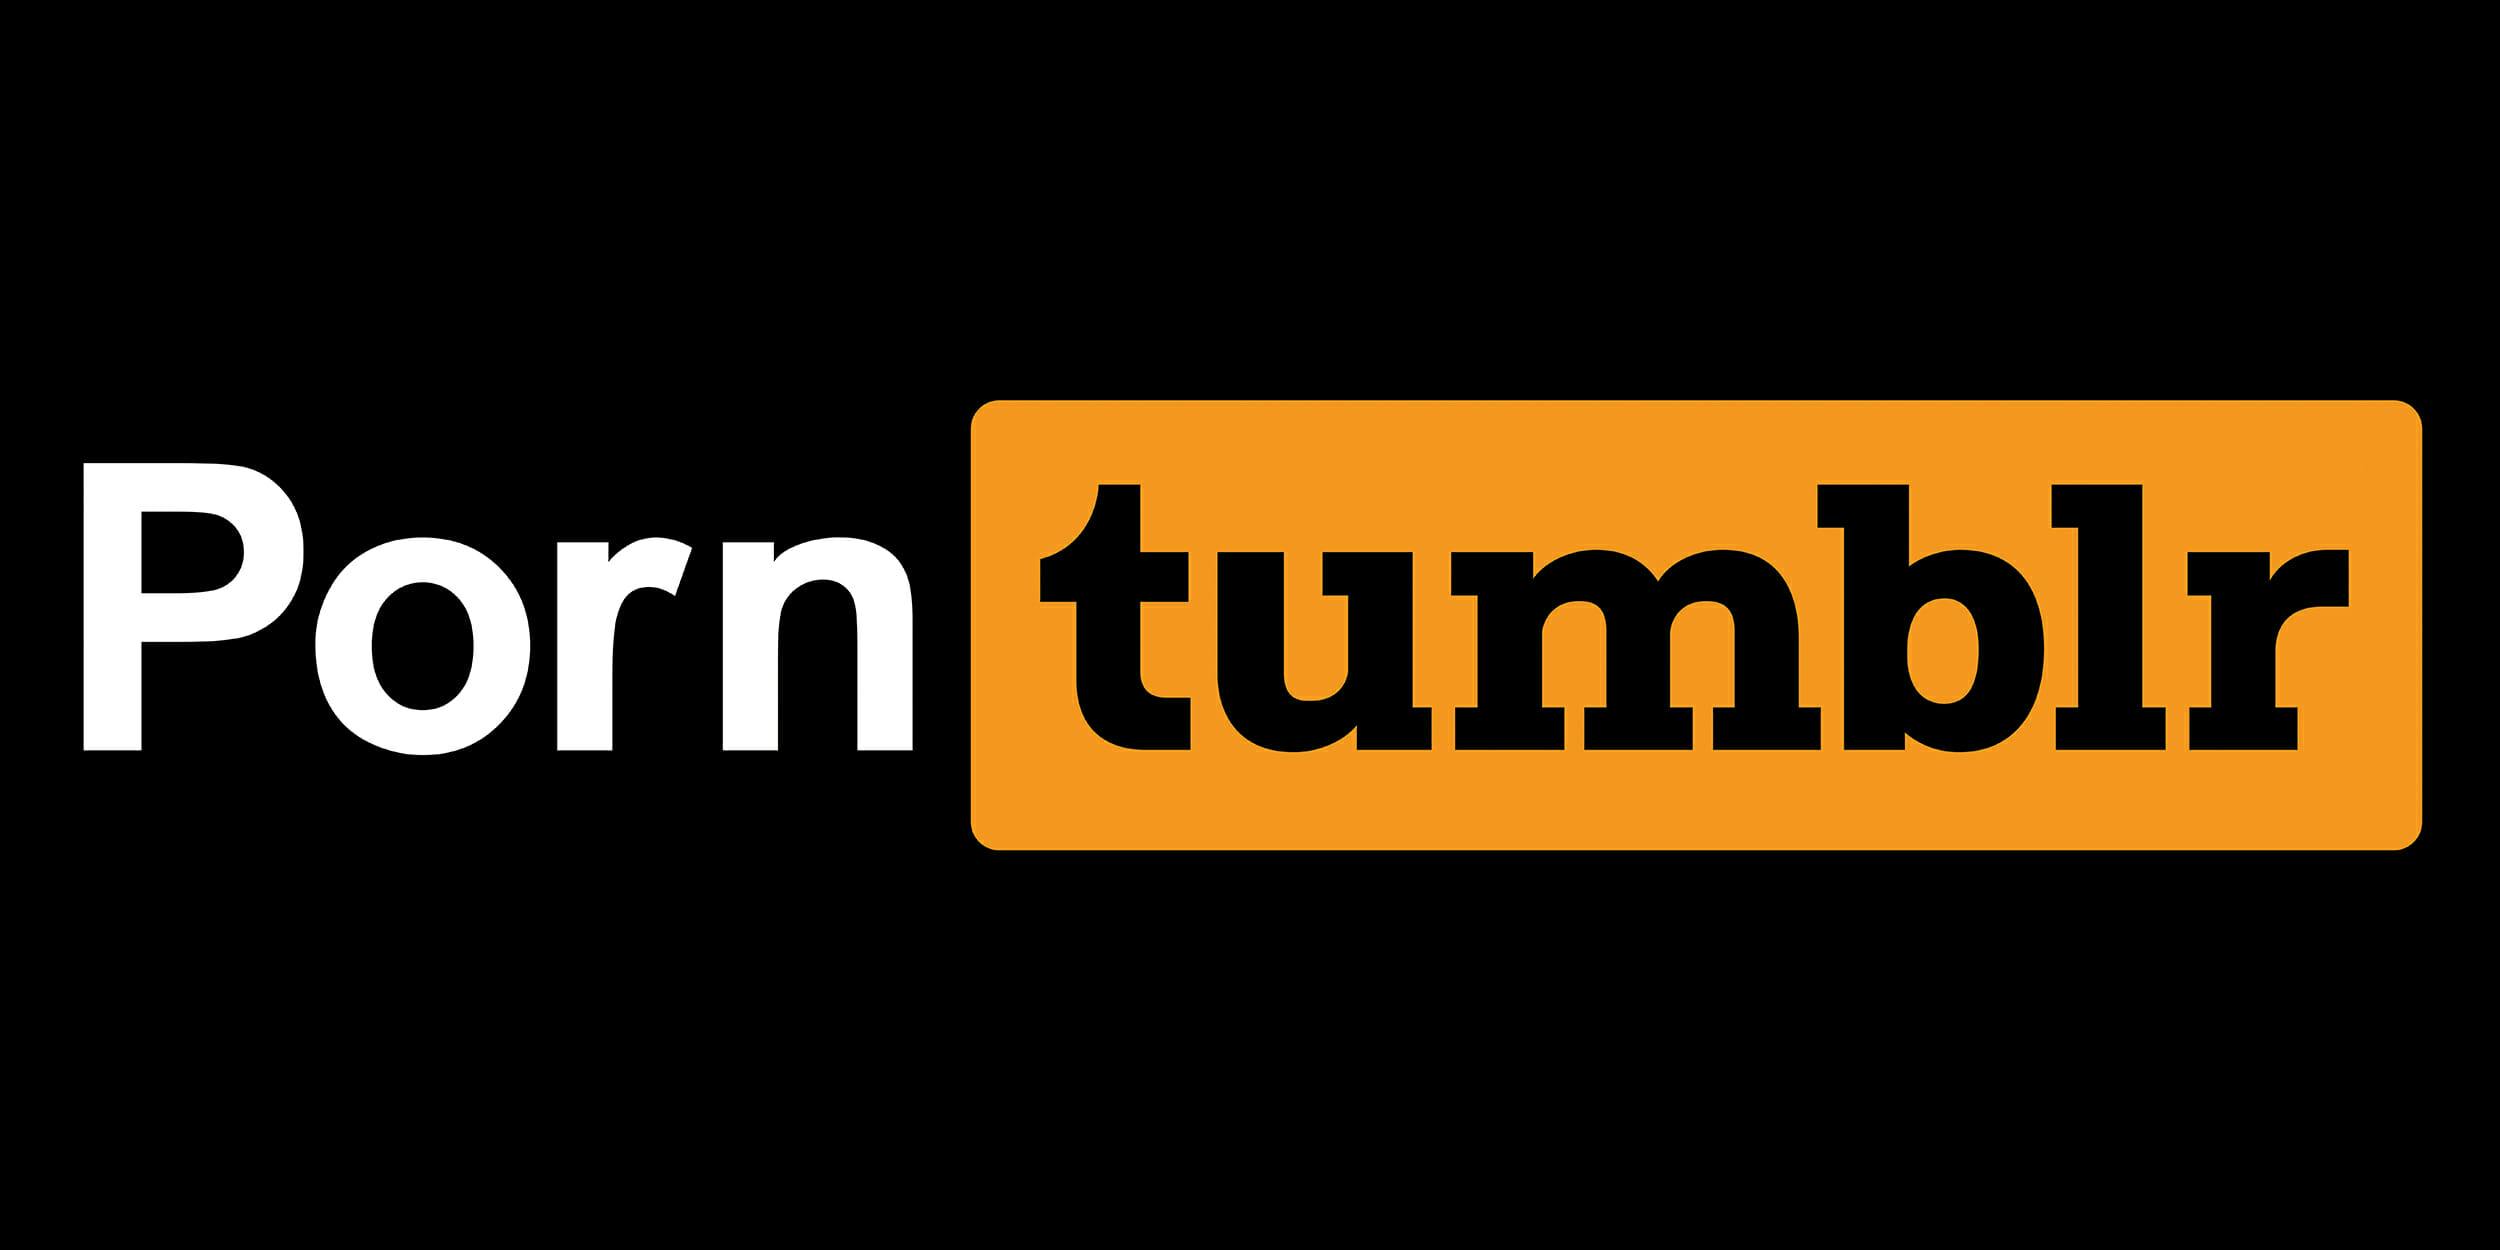 Don’t expect Pornhub to save Tumblr or sex workers